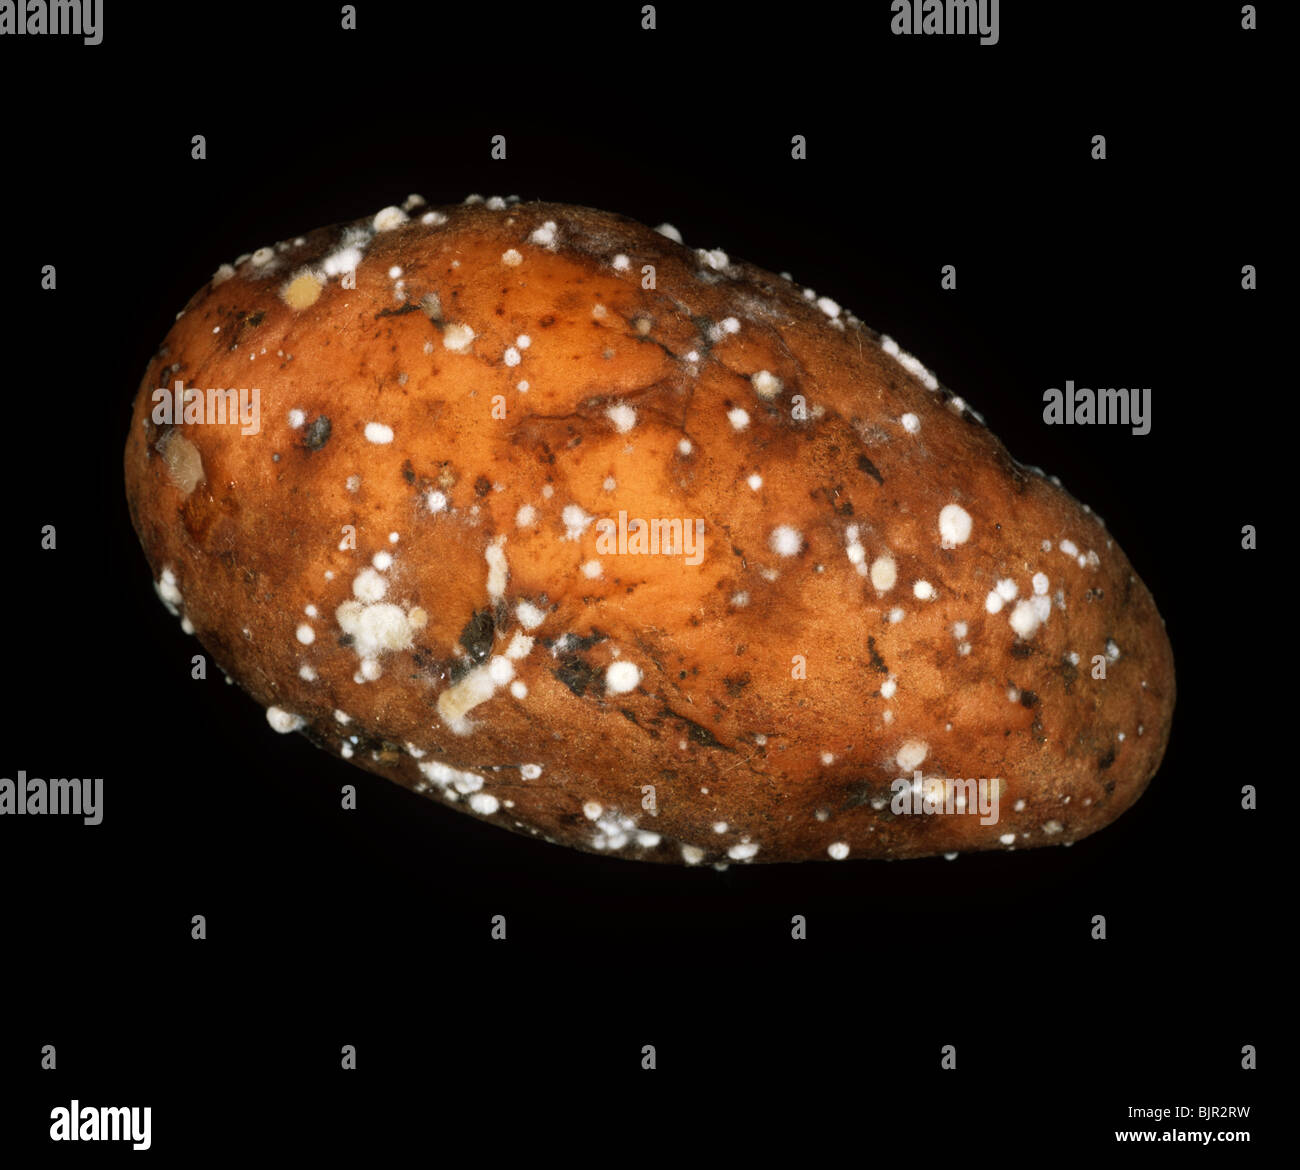 Rubbery rot (Geotrichum candidum) tuber infection on a potato Stock Photo